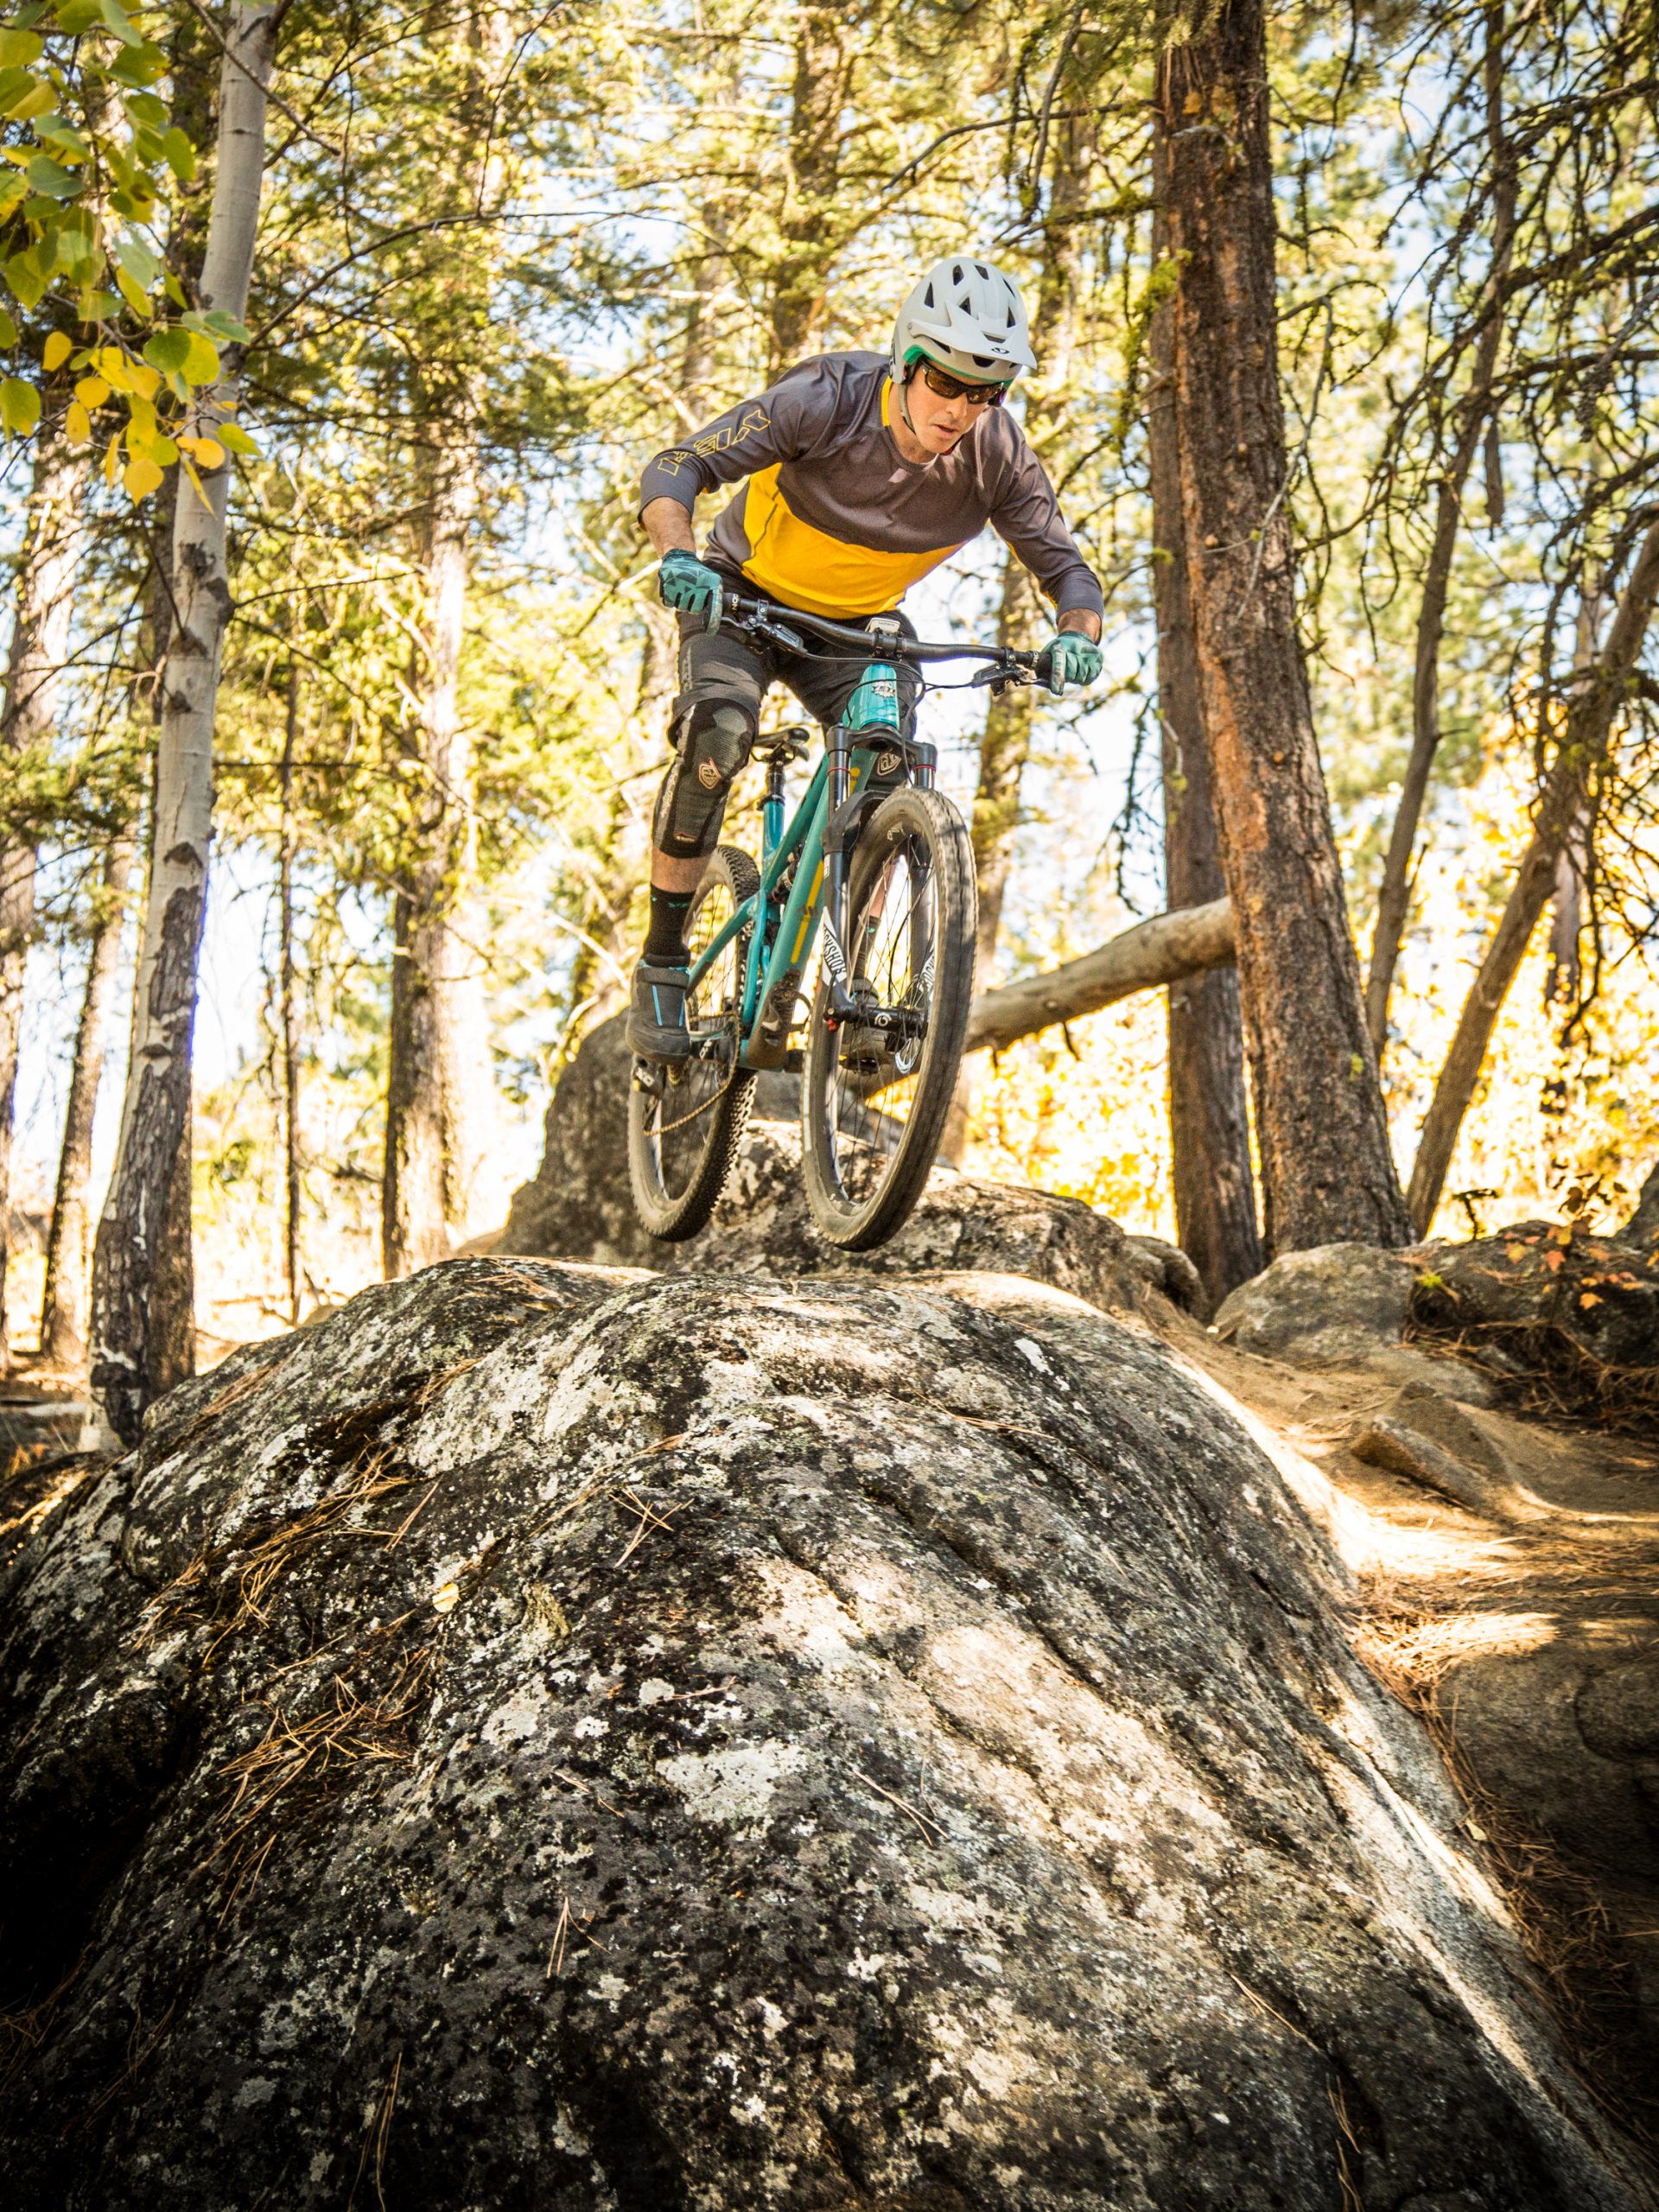 A person jumping a mountain bike over a large rock in a forest of trees at Jug Mountain Ranch.